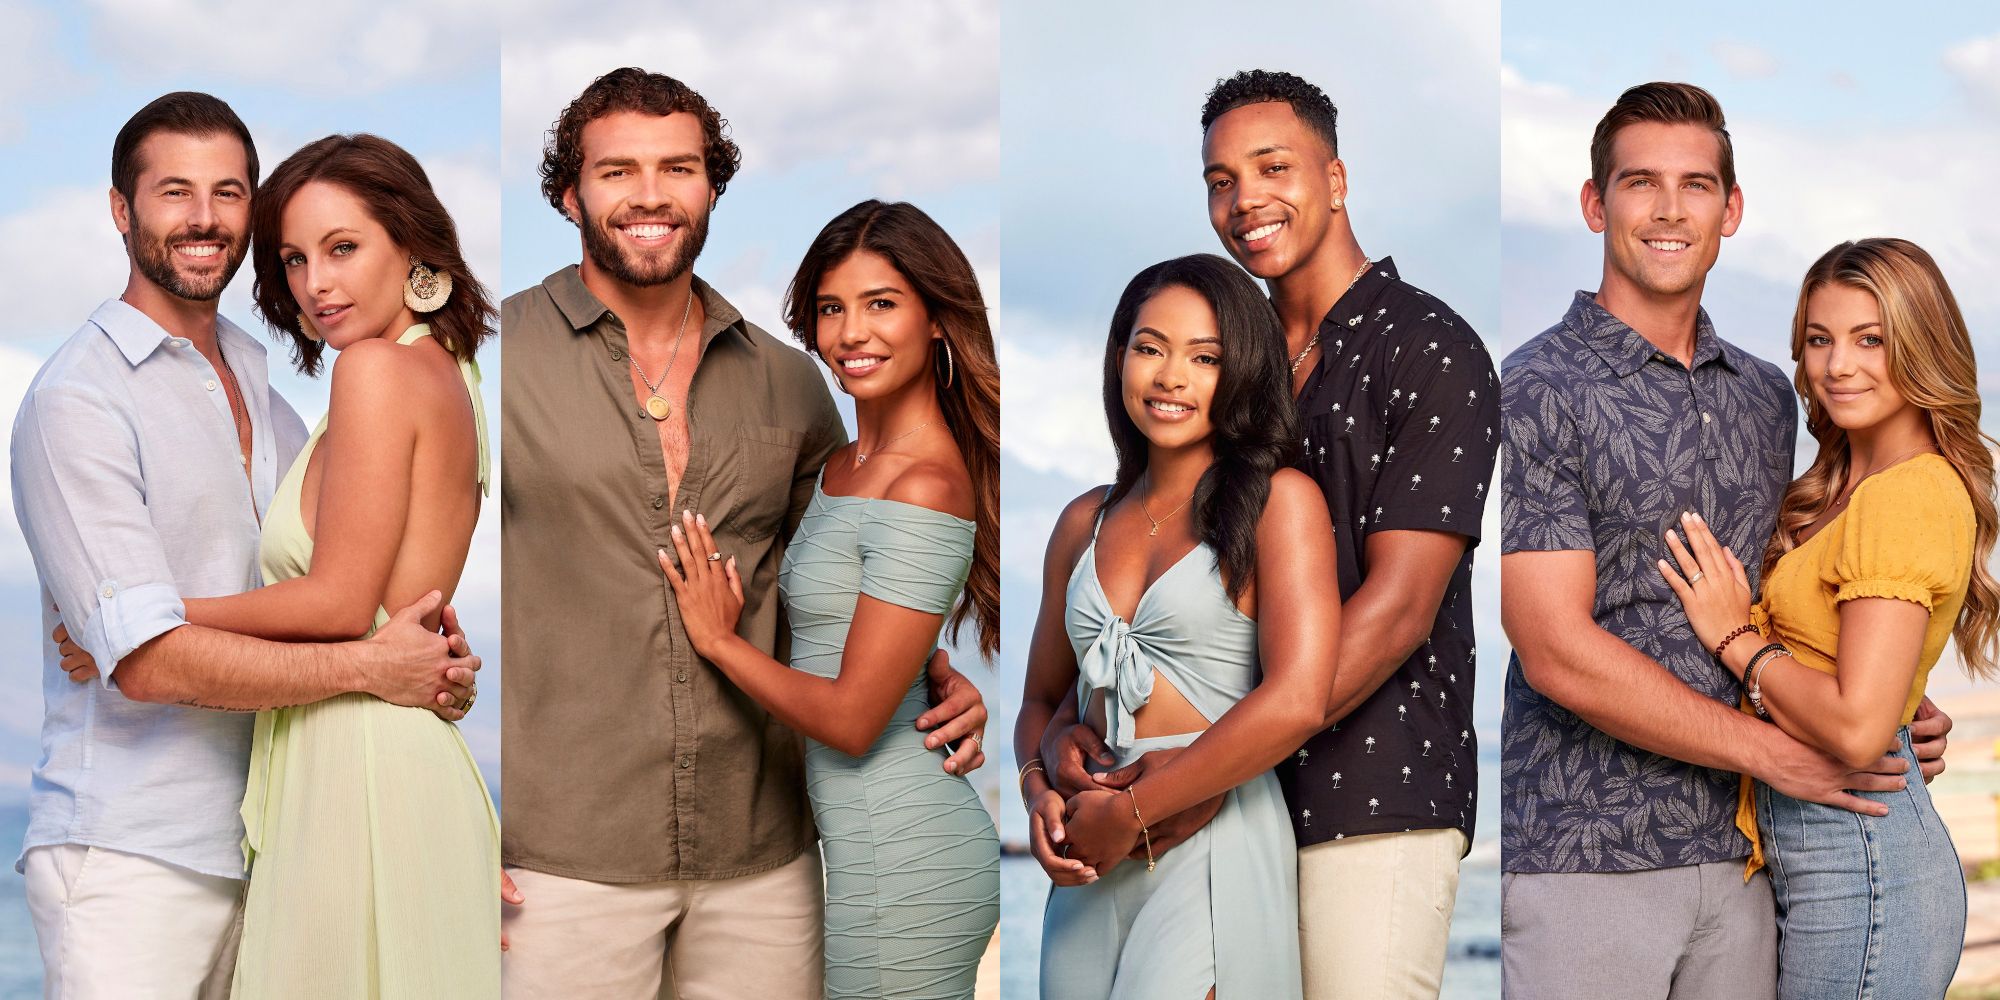 Temptation Island 3: All The Couples & Release Date For 2021 Season.